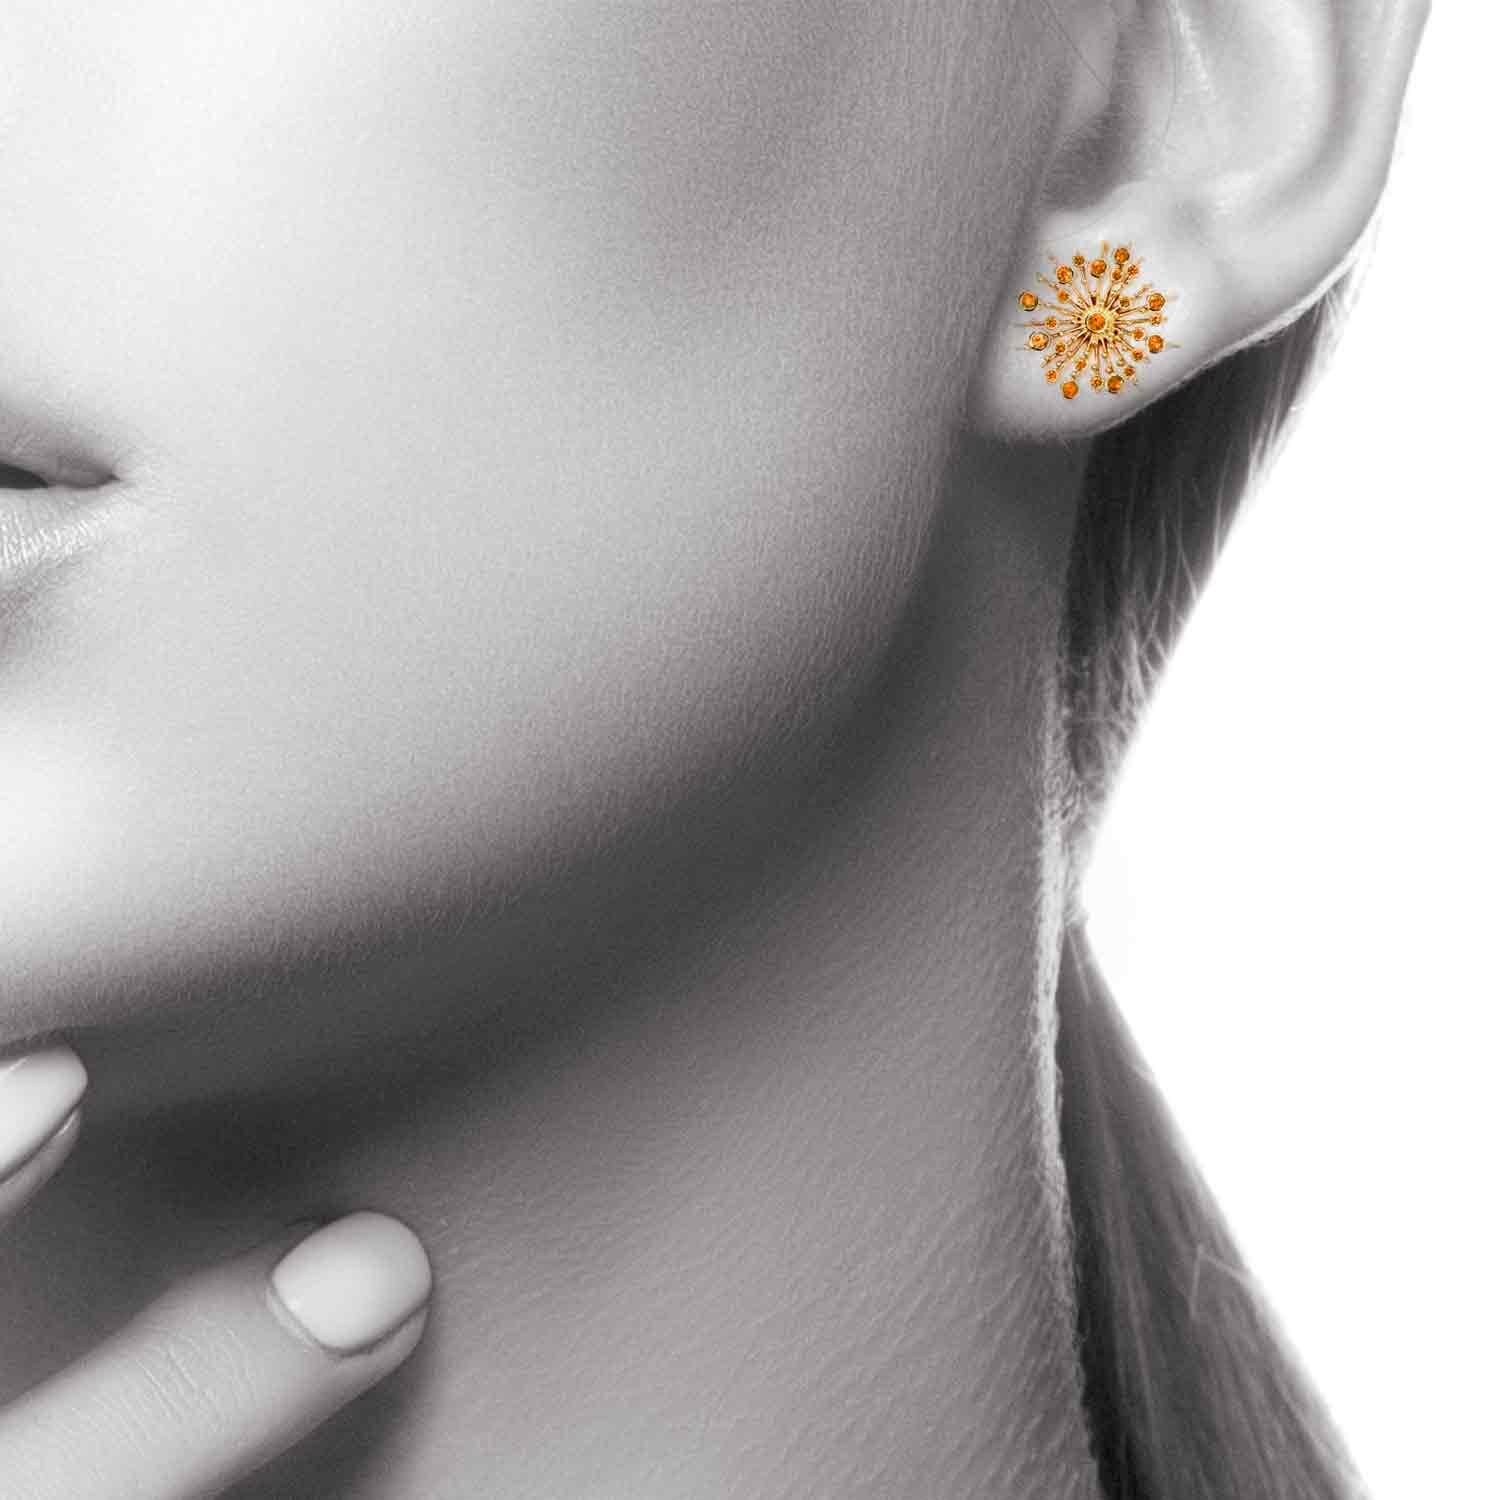 Part of the 'Soleil' collection by Natalie Barney, these stud earrings feature 48 Orange Sapphires with a total weight of 0.47 carats. The matching pendant is available.

Made in 9 carat yellow gold.  Please request the video for an even closer view